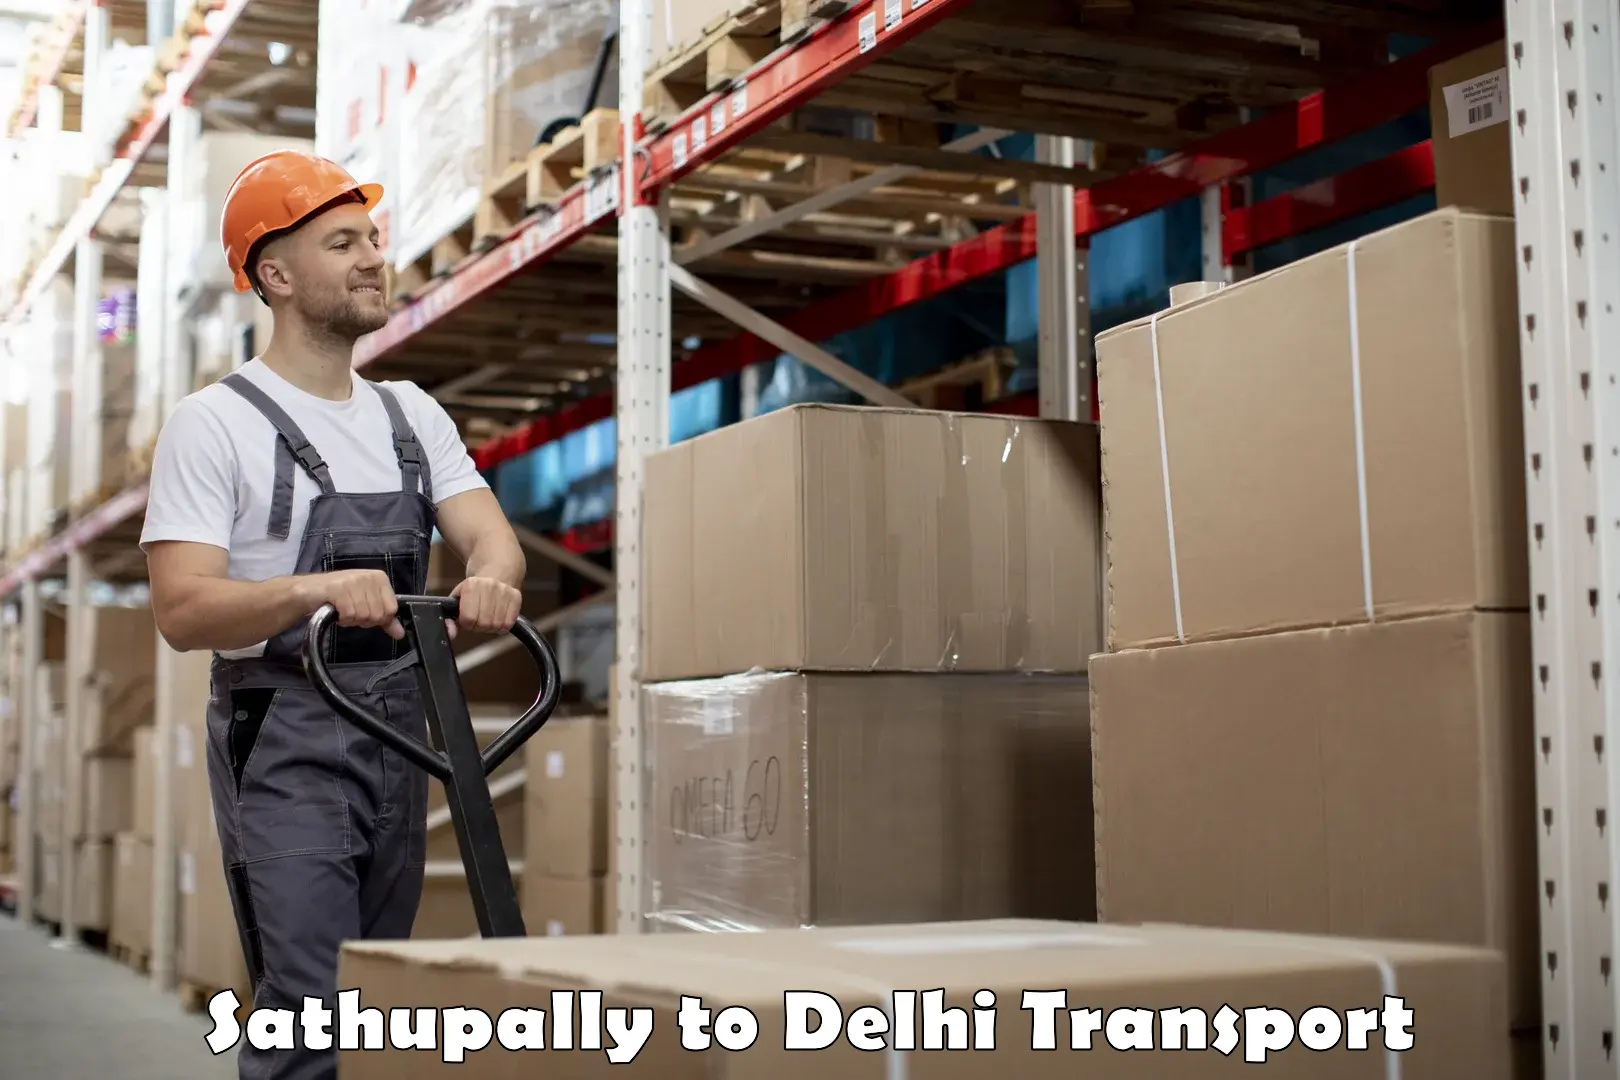 Parcel transport services Sathupally to Delhi